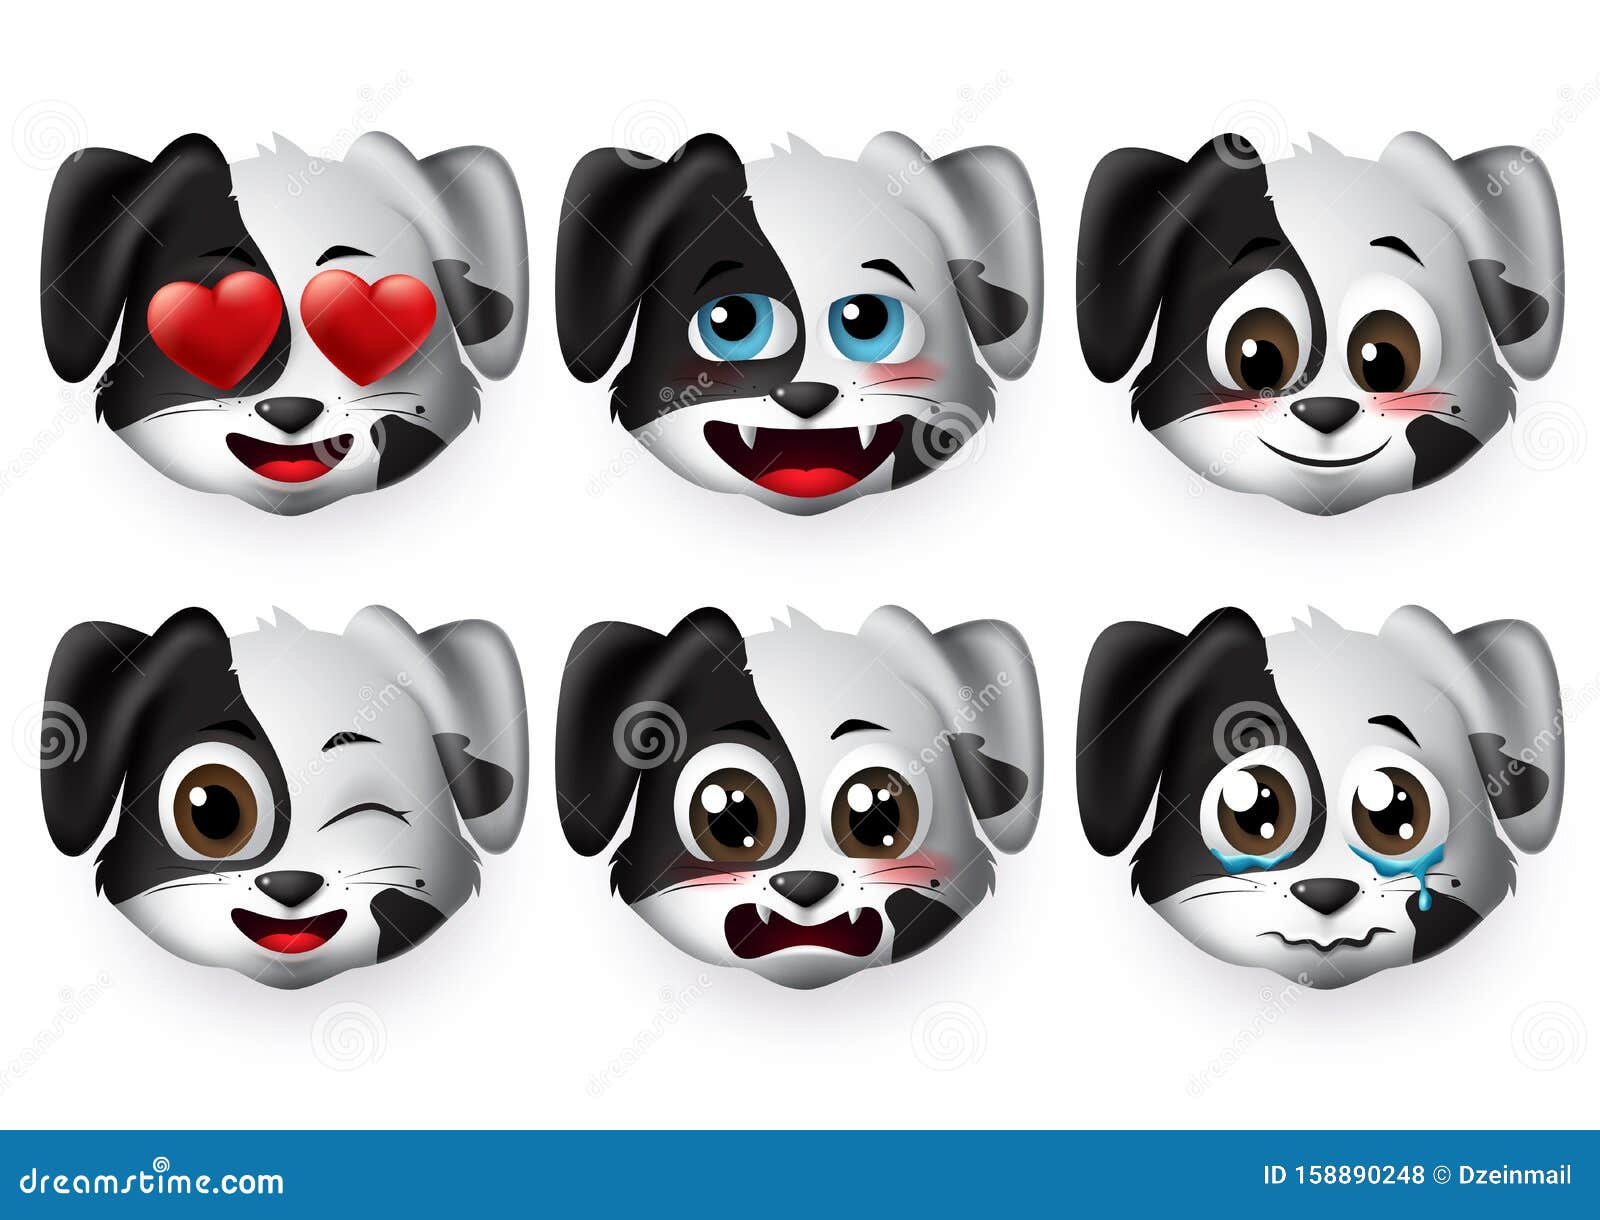 Dog Emoticon Vector Set. Cute Puppy Dogs Face Emoticons and Emojis in Funny  and Shy Facial Expressions. Stock Vector - Illustration of emojis,  character: 158890248